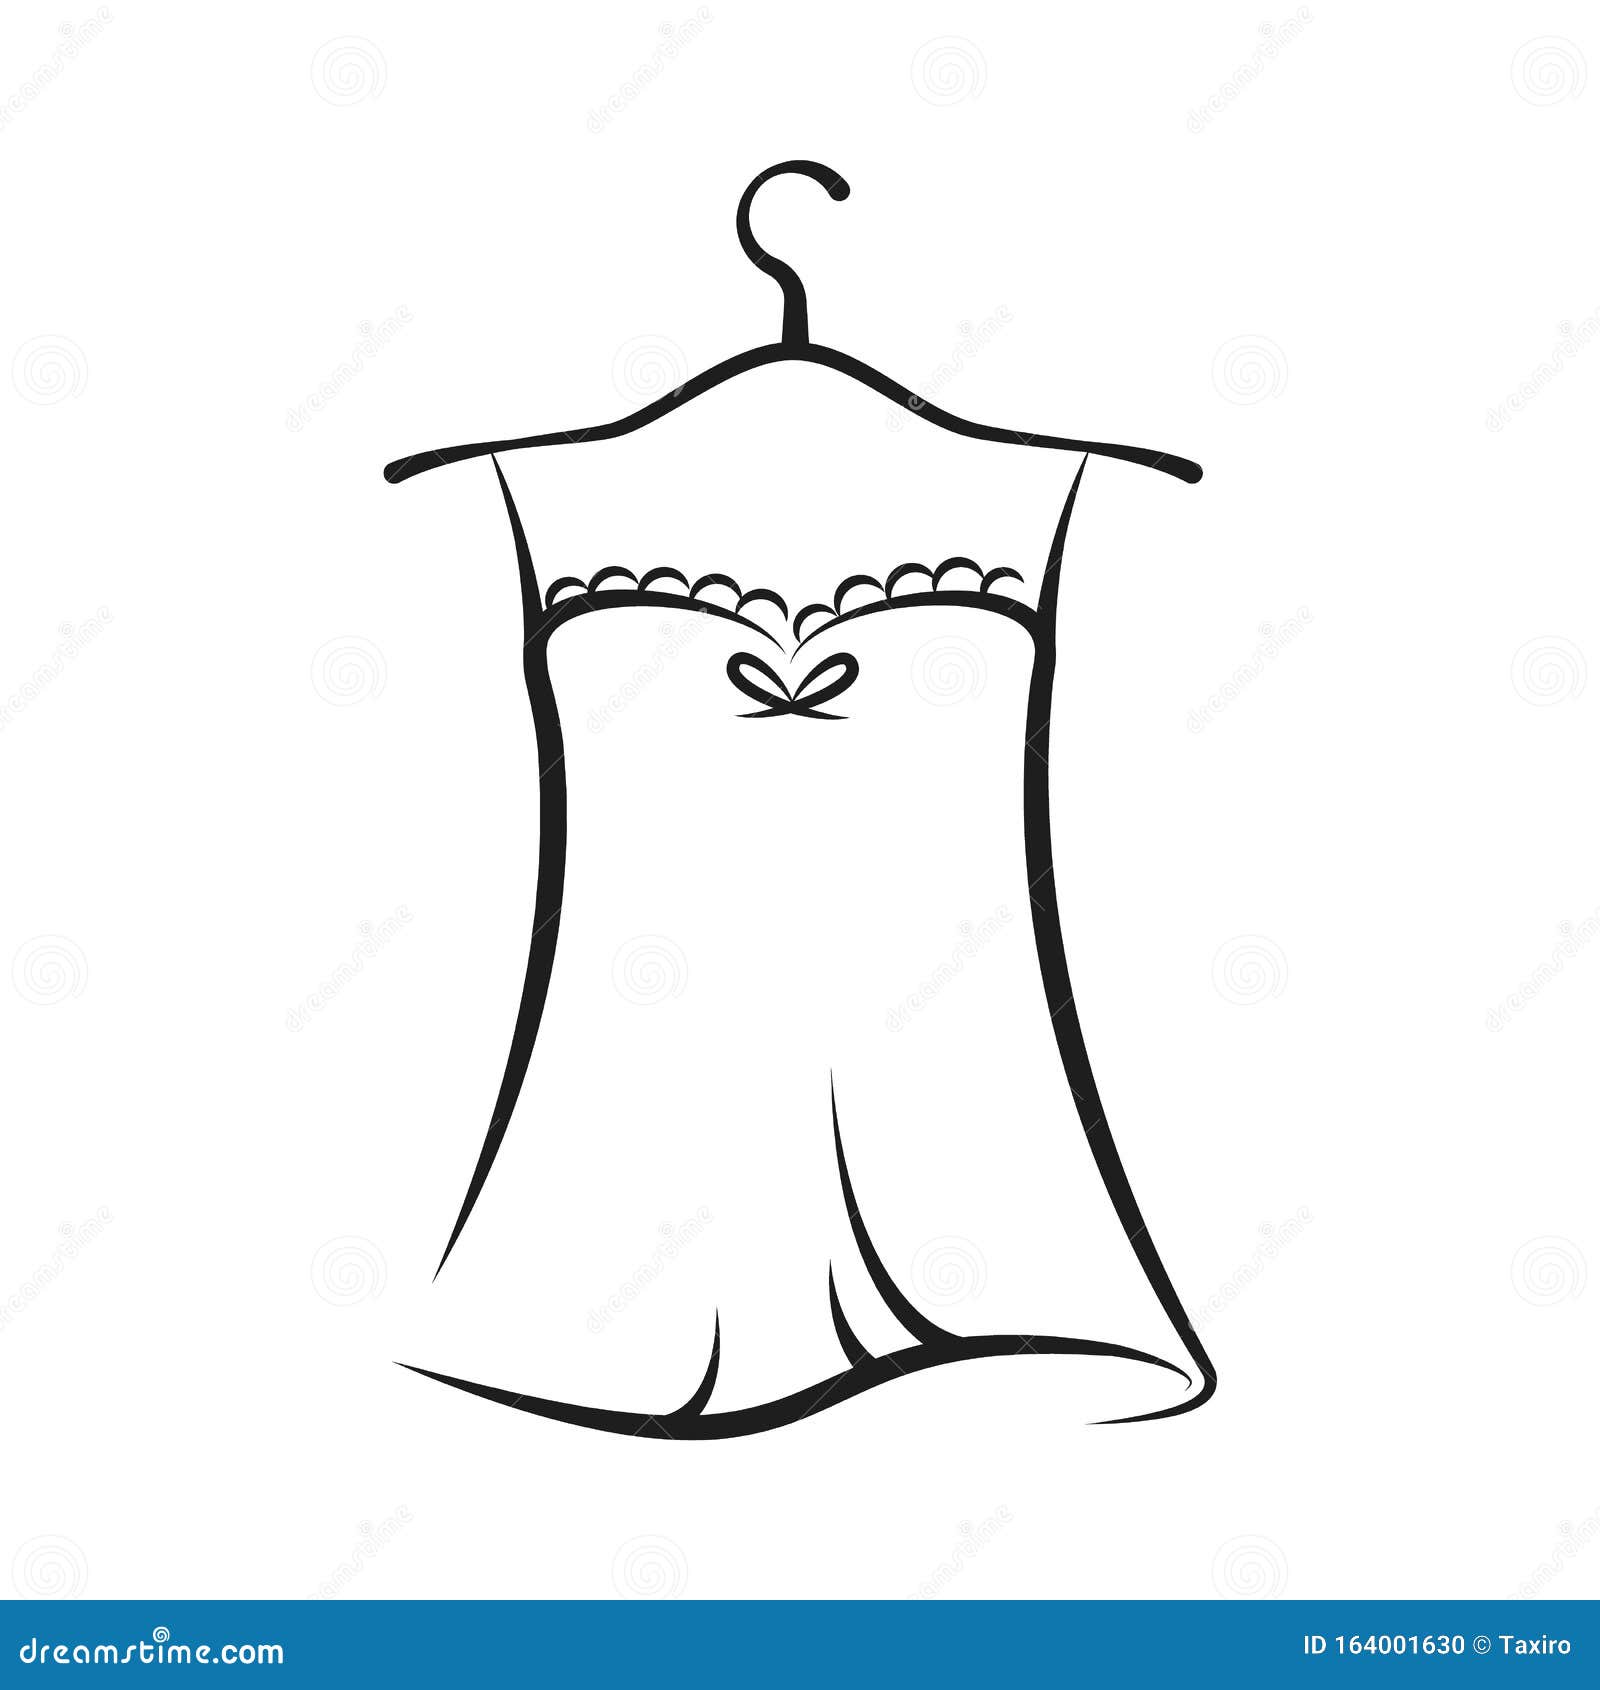 Women nightgown lace stock vector. Illustration of design - 164001630